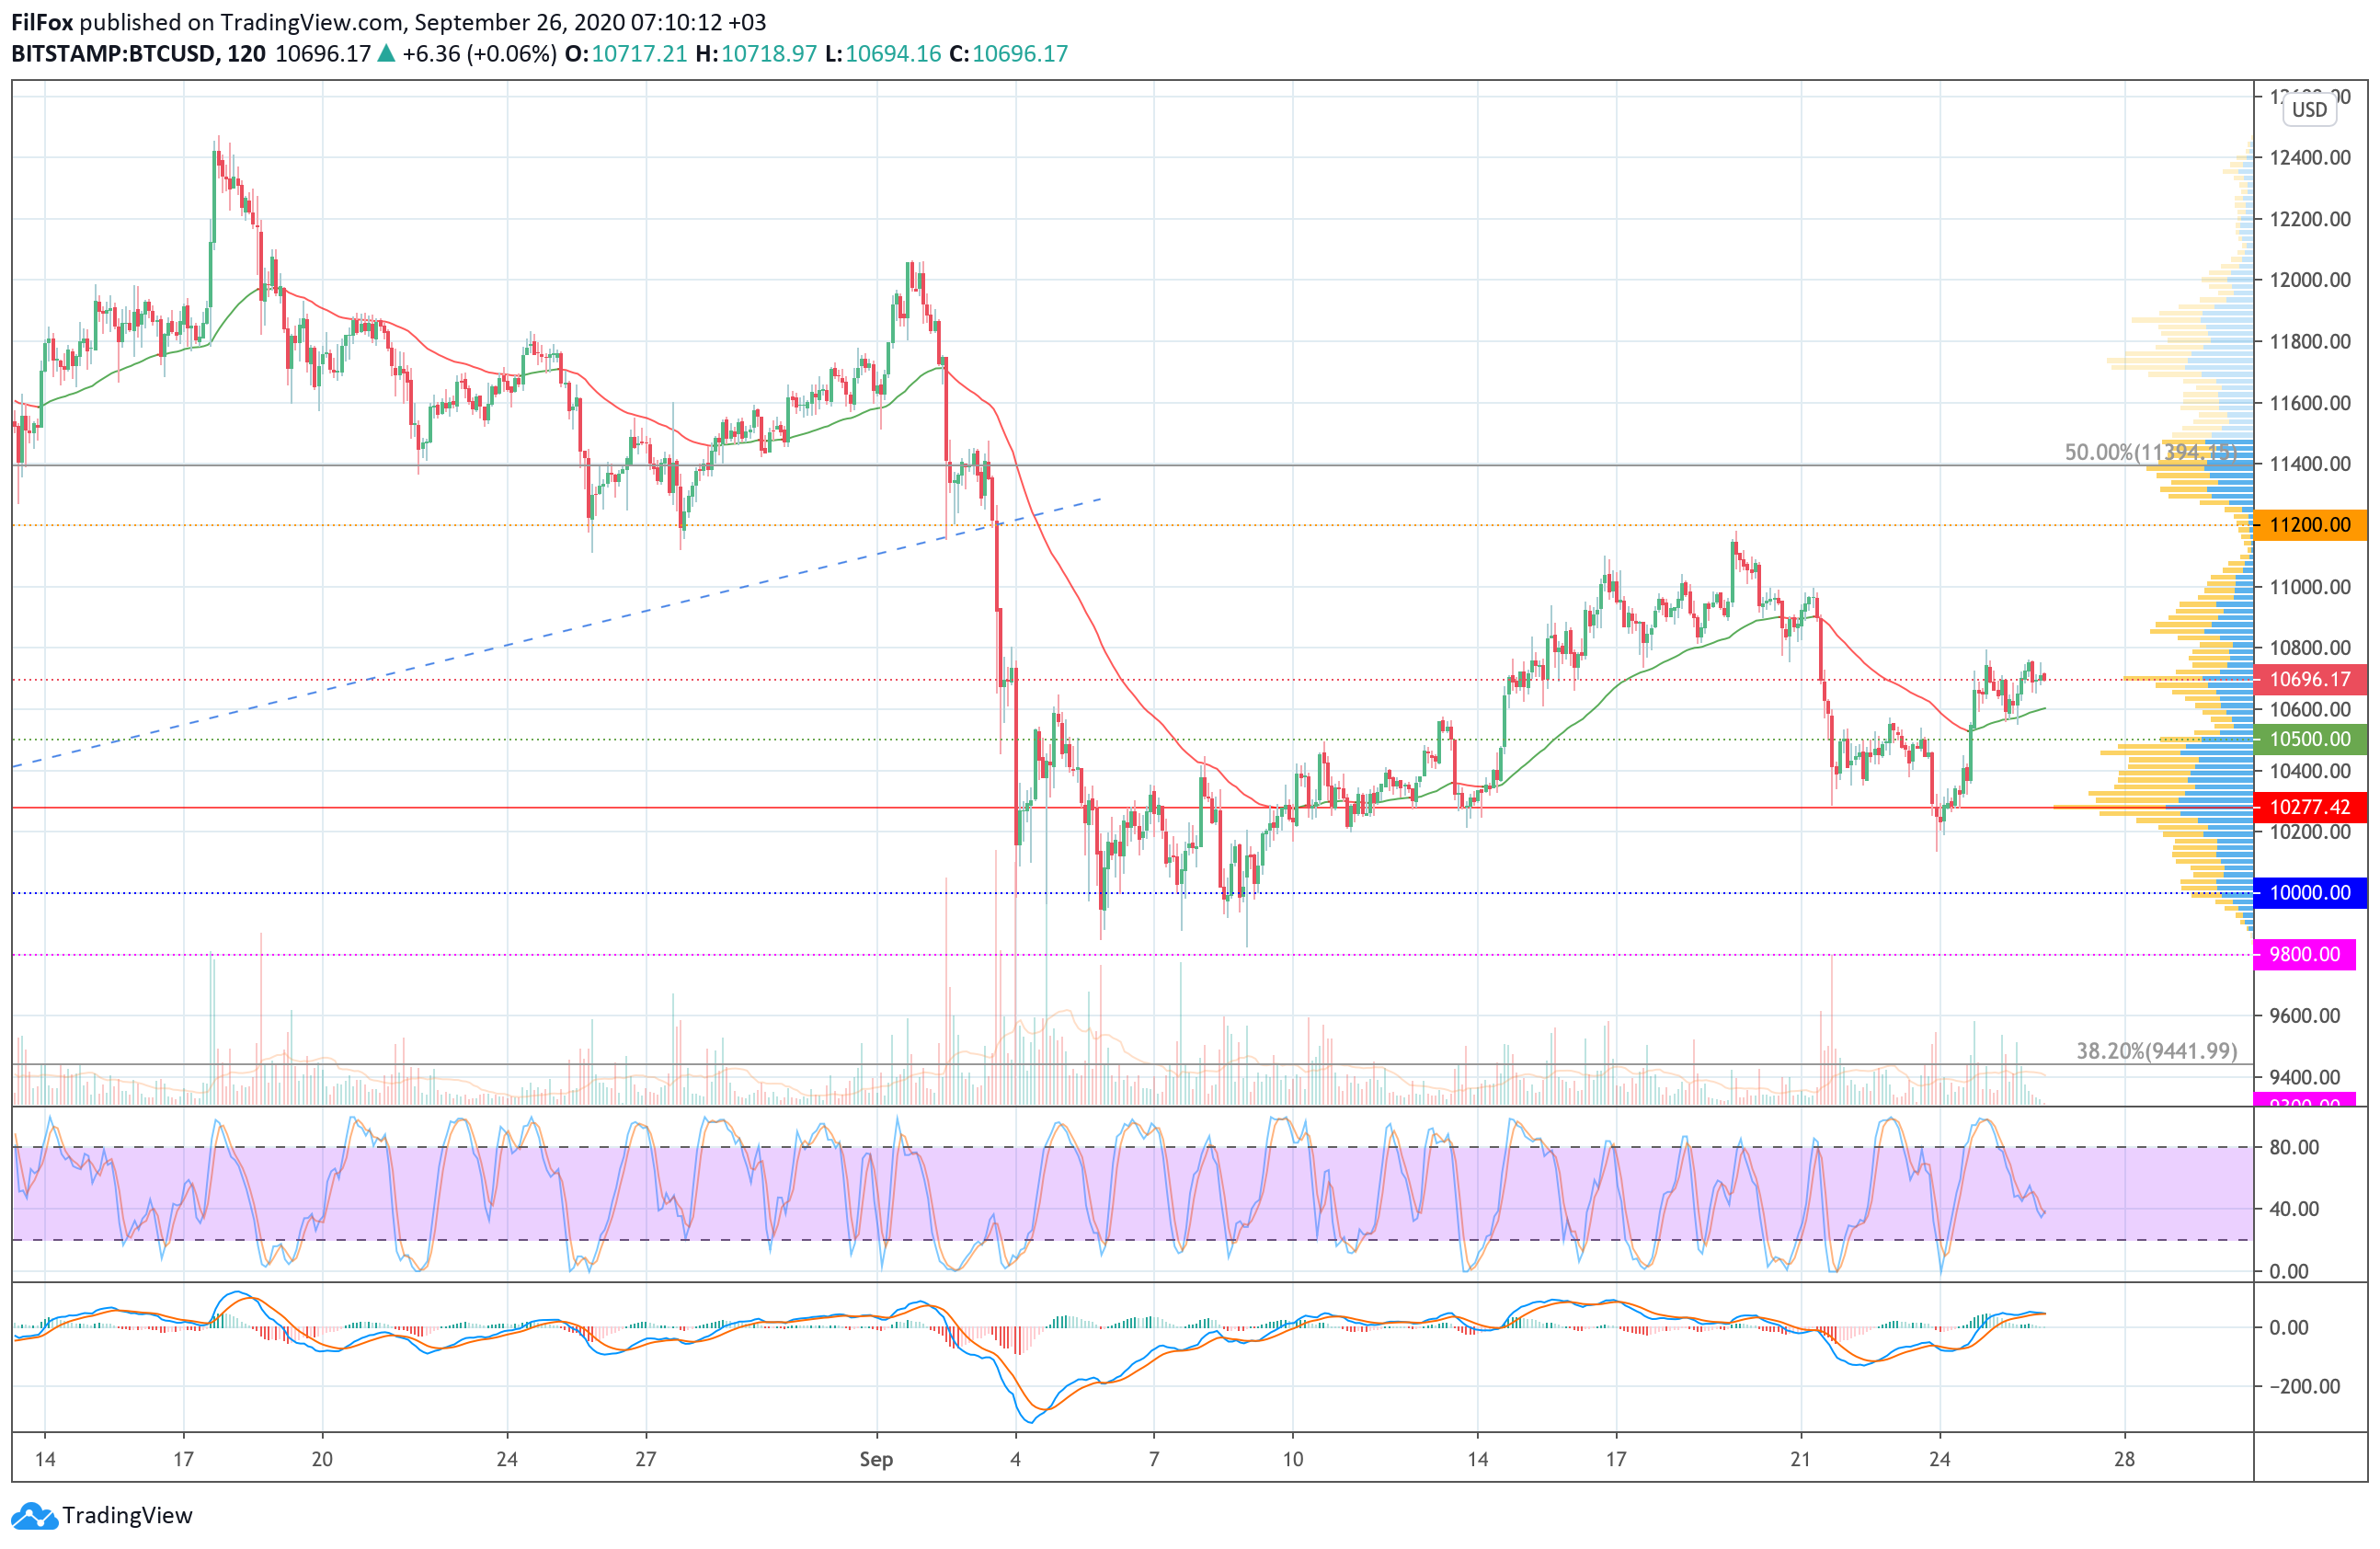 Analysis of prices for Bitcoin, Ethereum, XRP for 09/26/2020